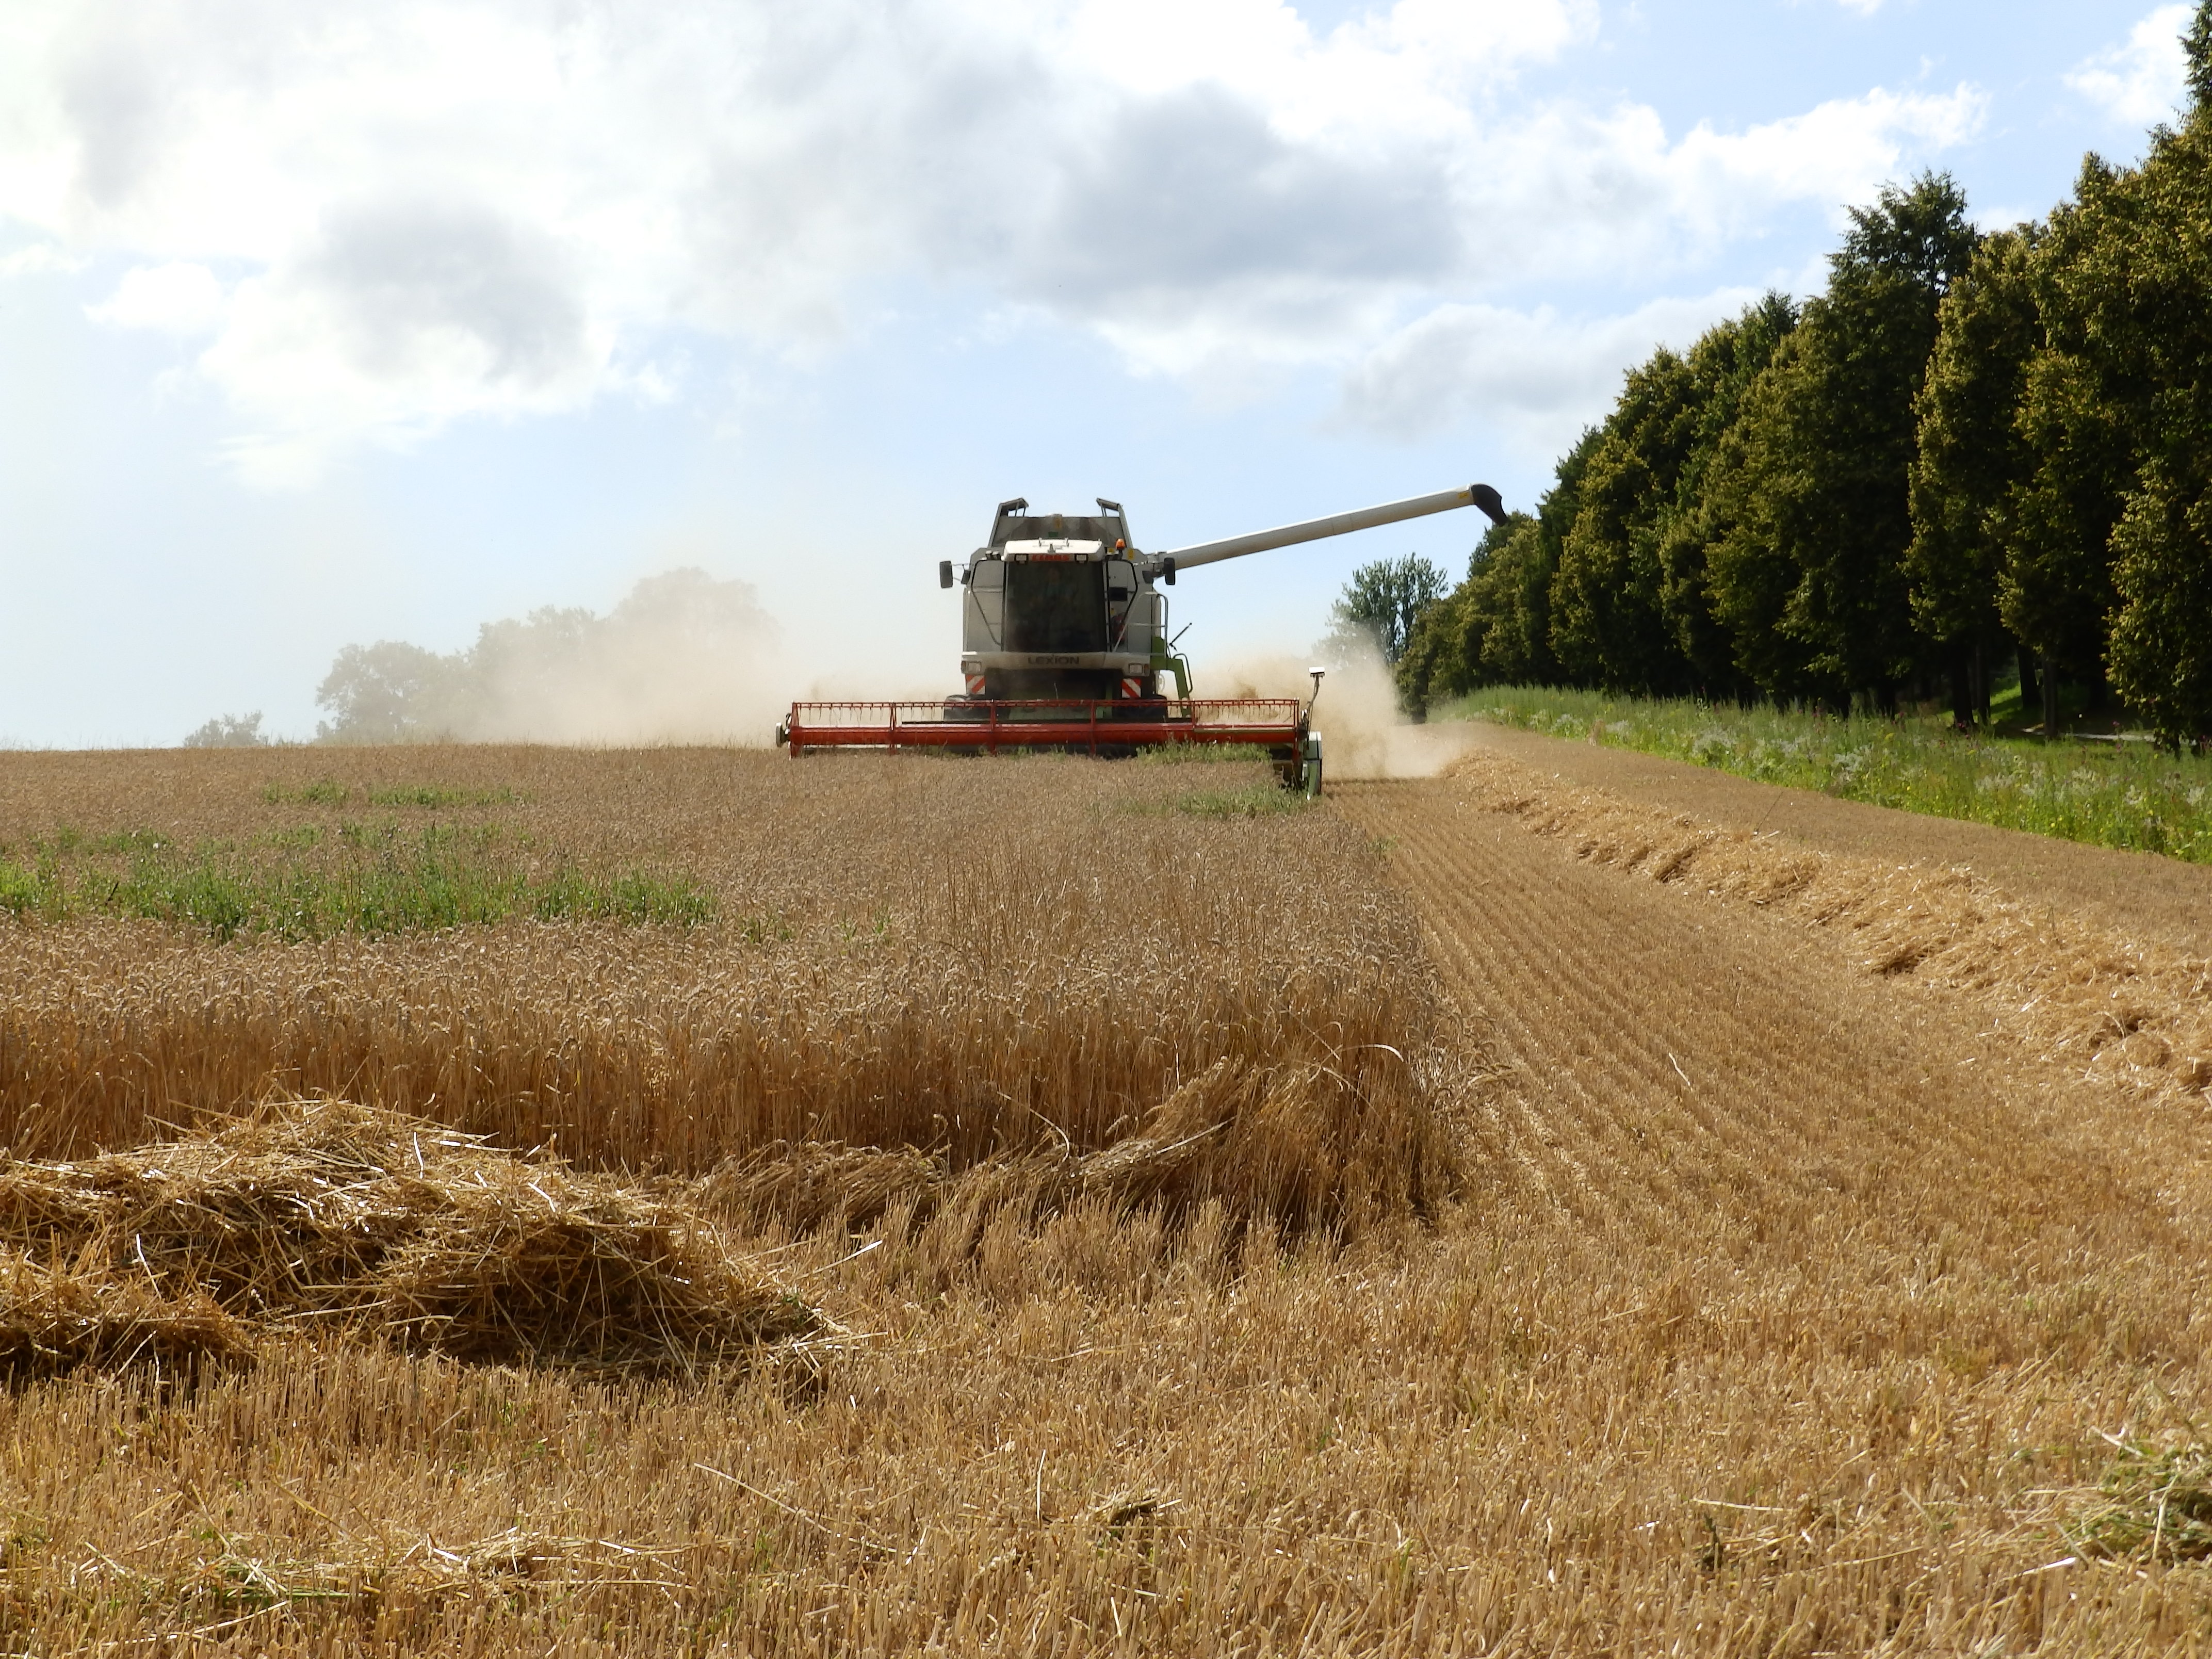 A combine harvester mowing a field.